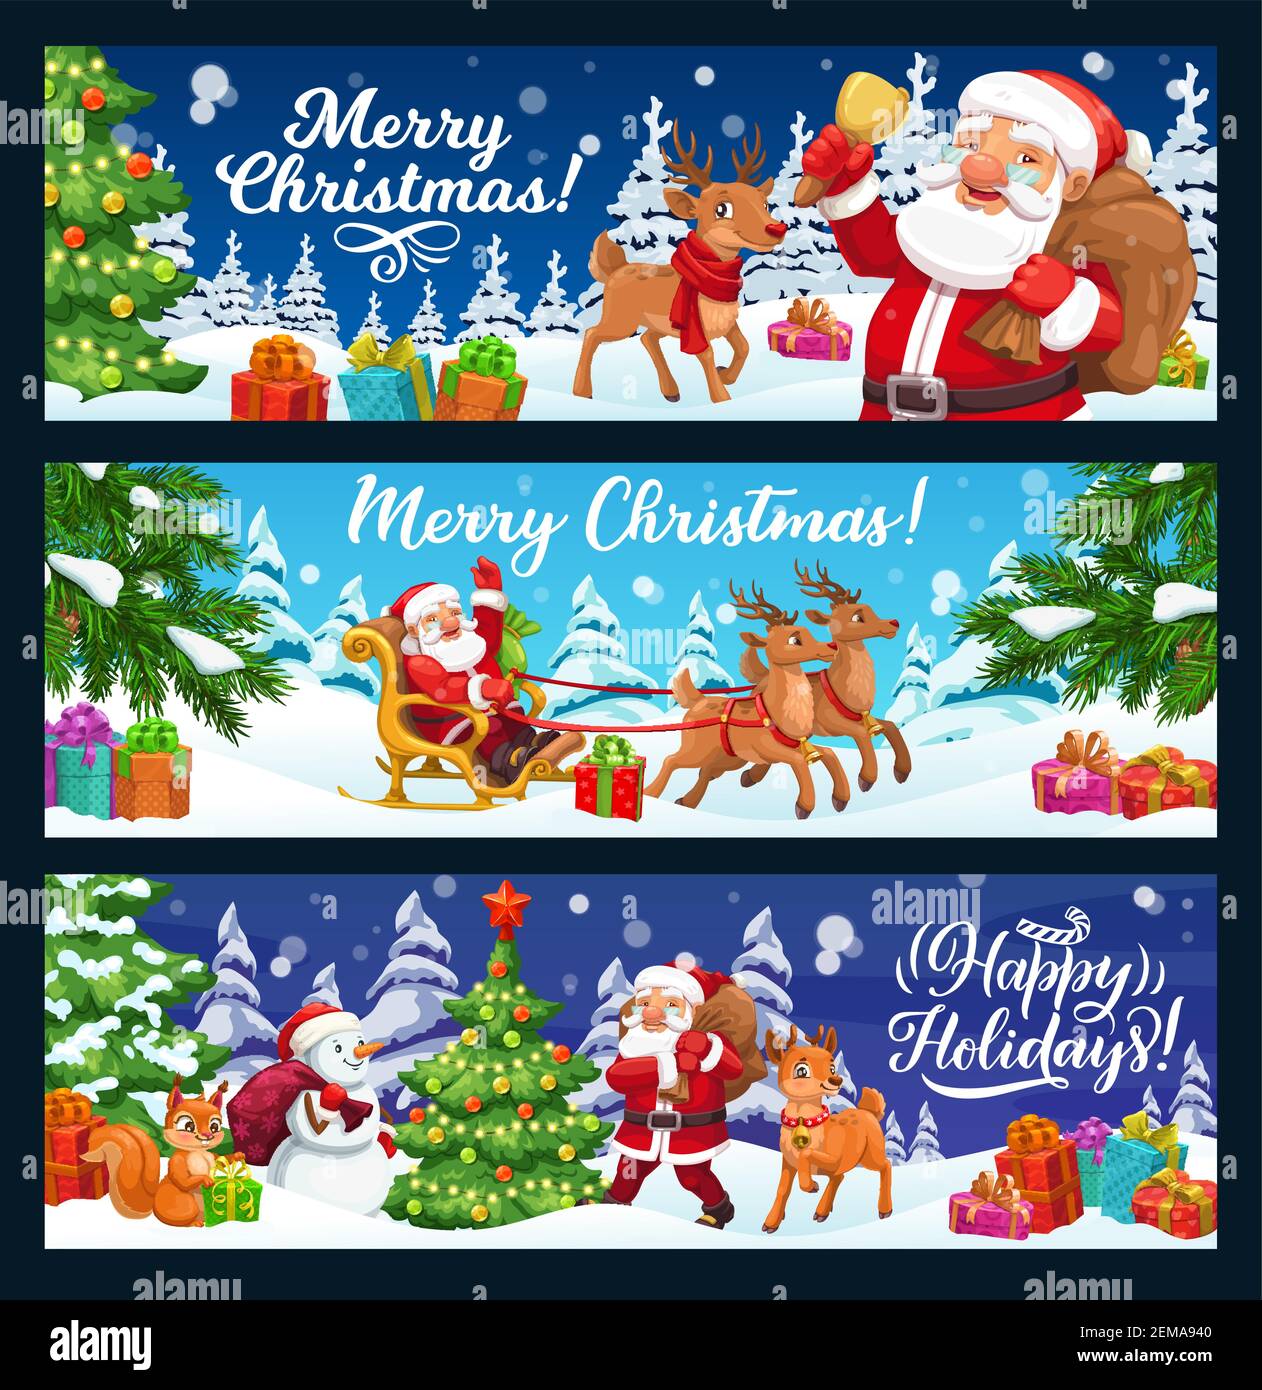 Merry Christmas, winter holidays vector banners with Santa and gifts bag on reindeer sleigh. Christmas greeting calligraphy and cartoon forest animals Stock Vector